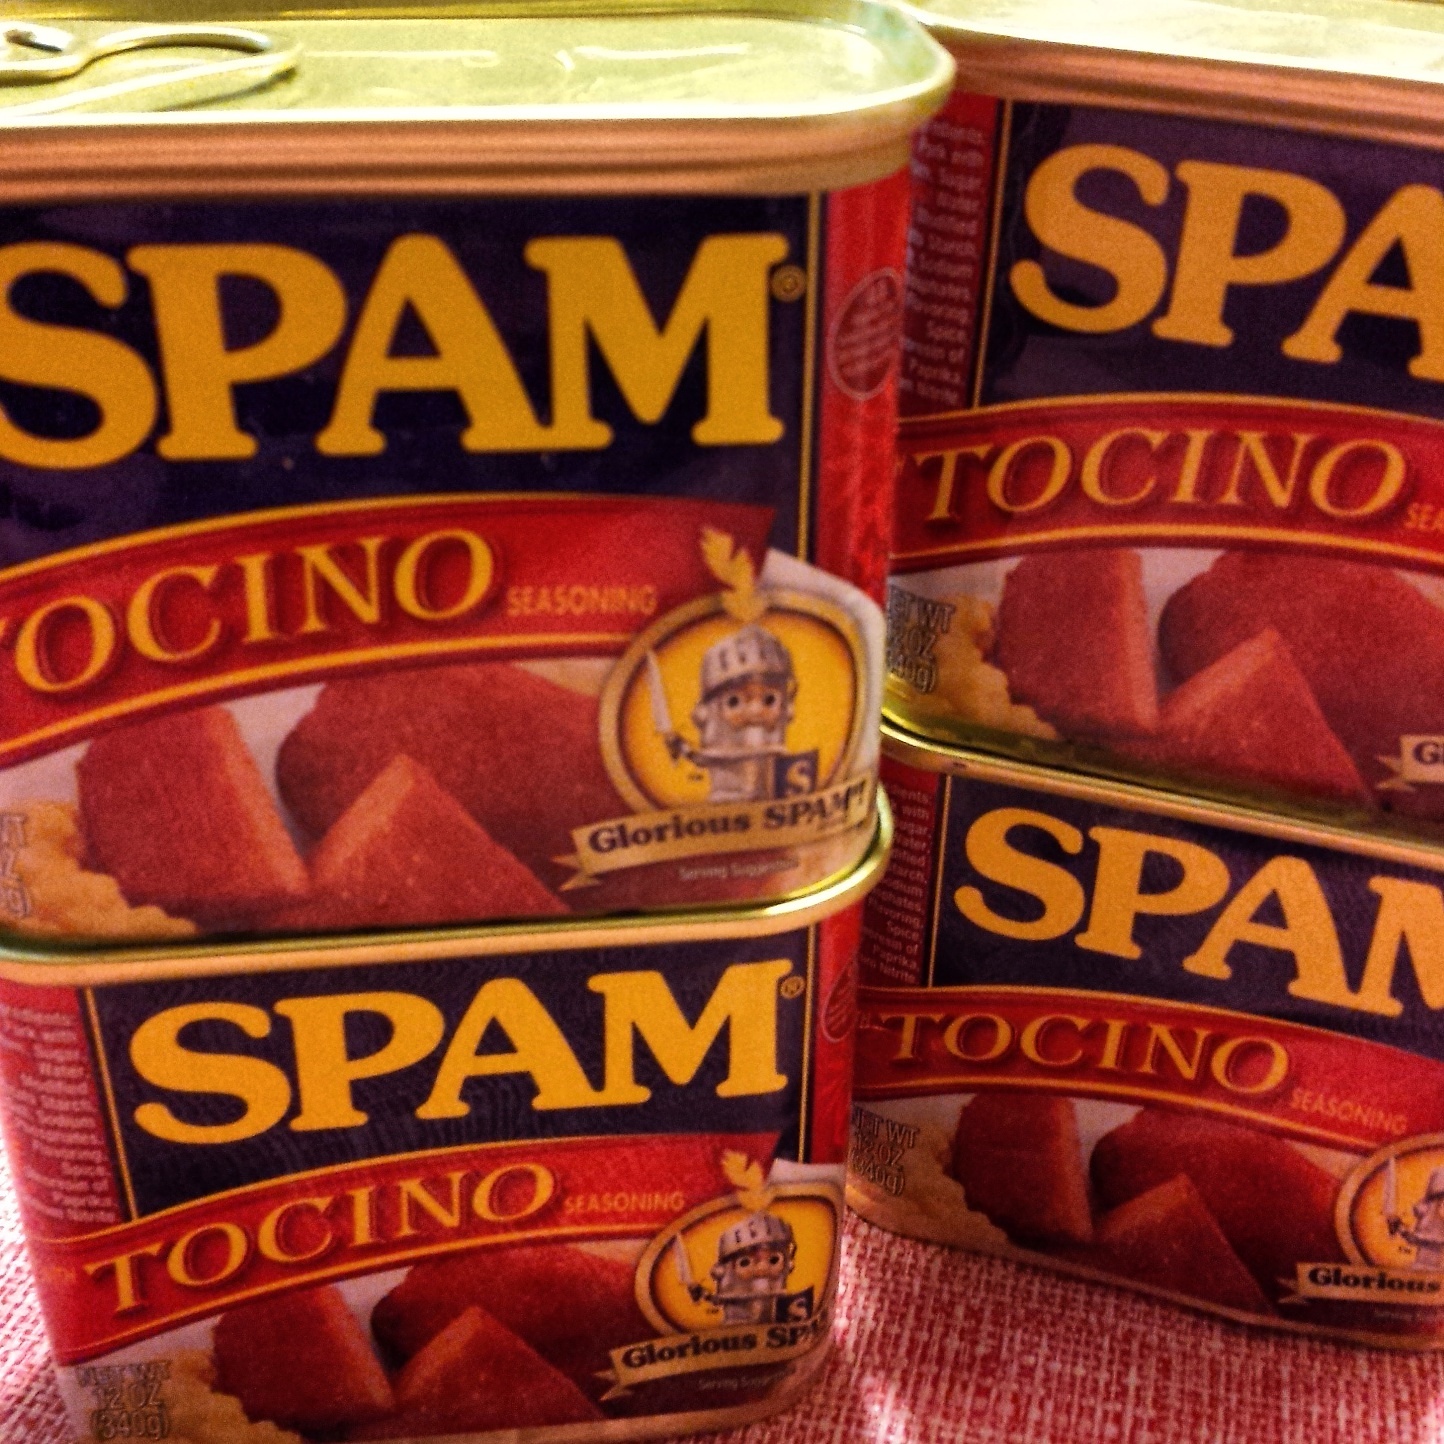 Hawaii to be first market for Spam's teriyaki flavor